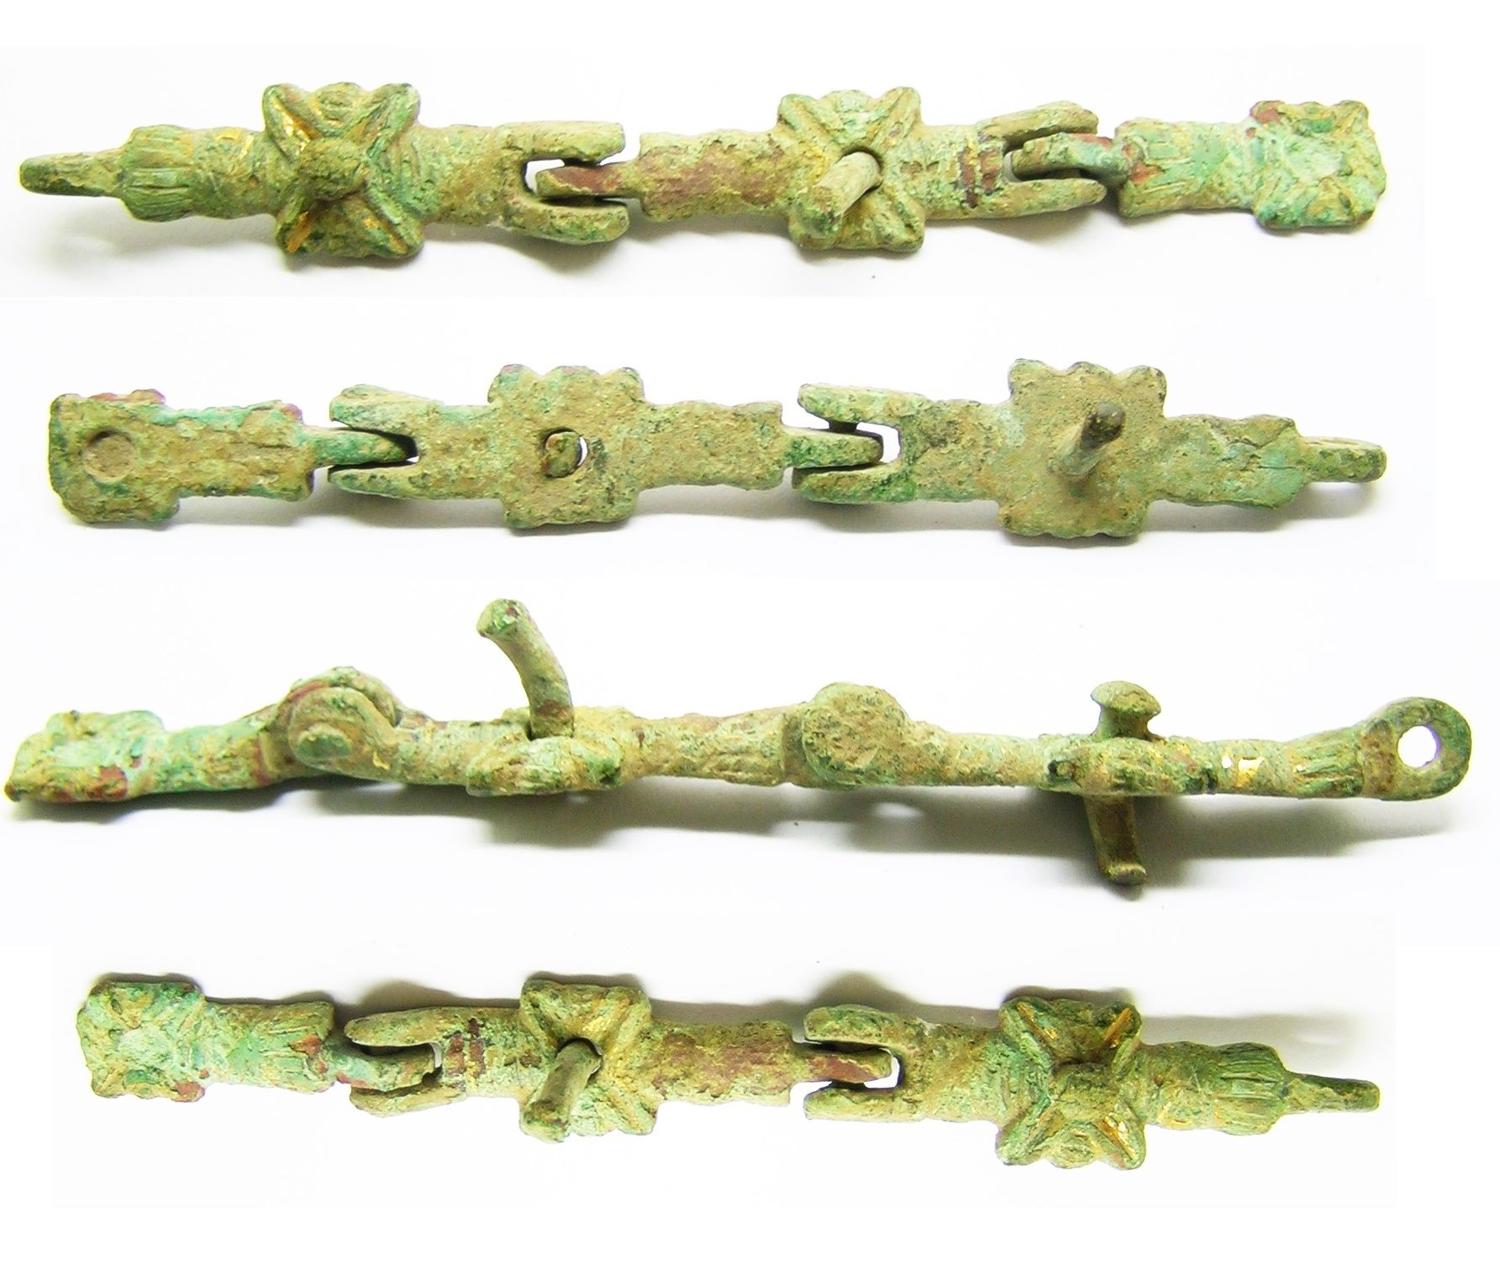 Medieval gilt bronze harness fitting